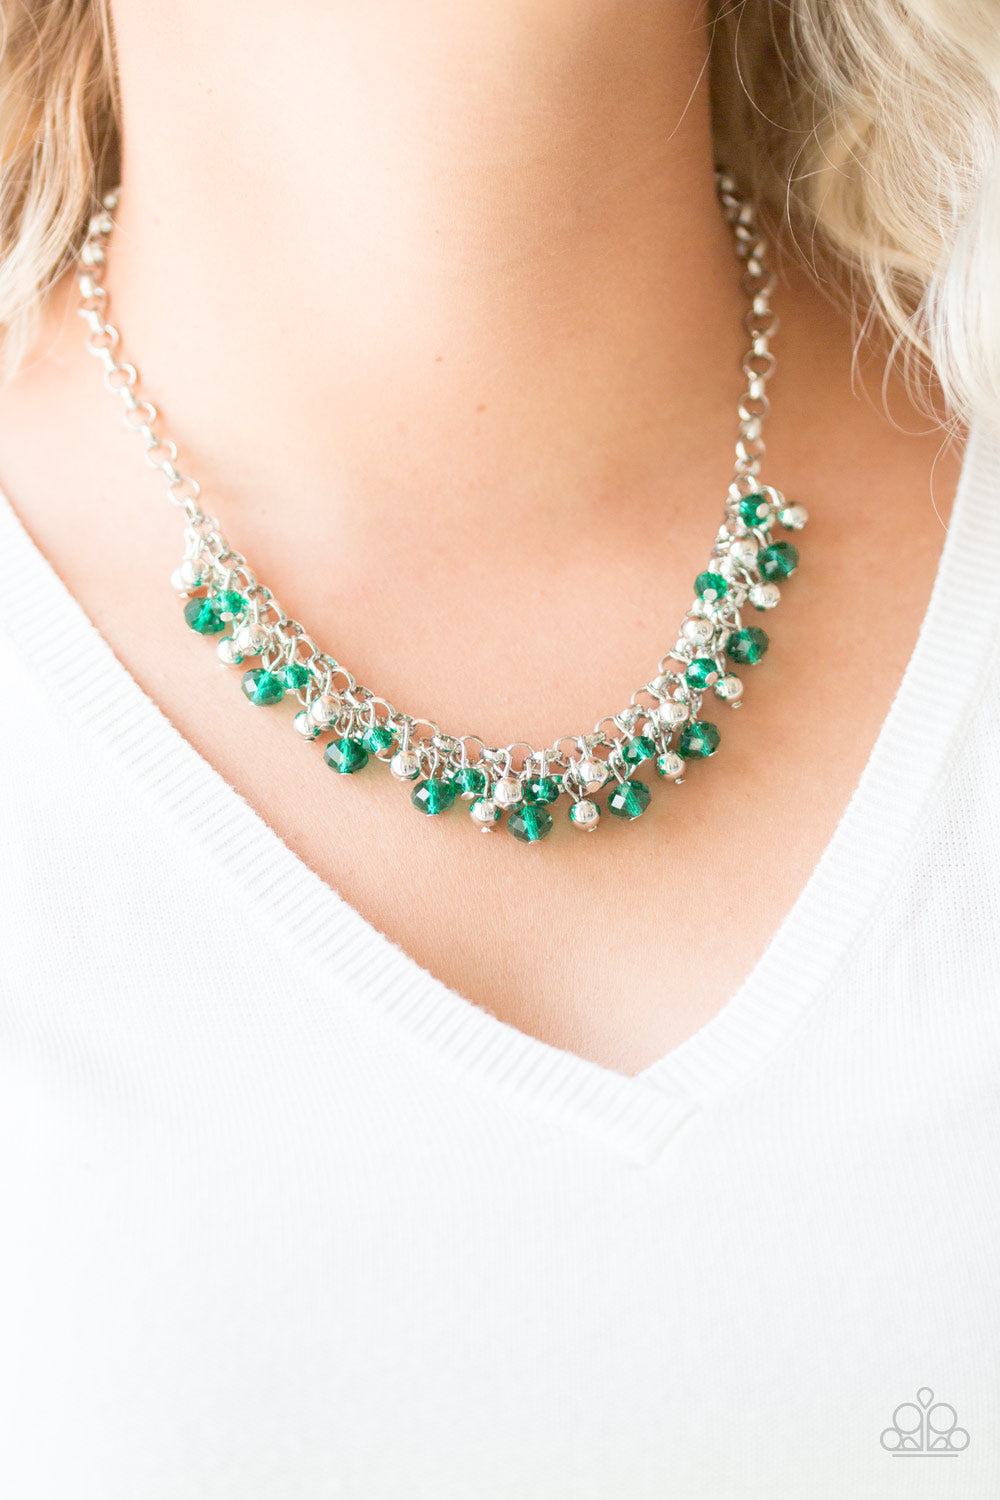 Trust Fund Baby - green - Paparazzi necklace